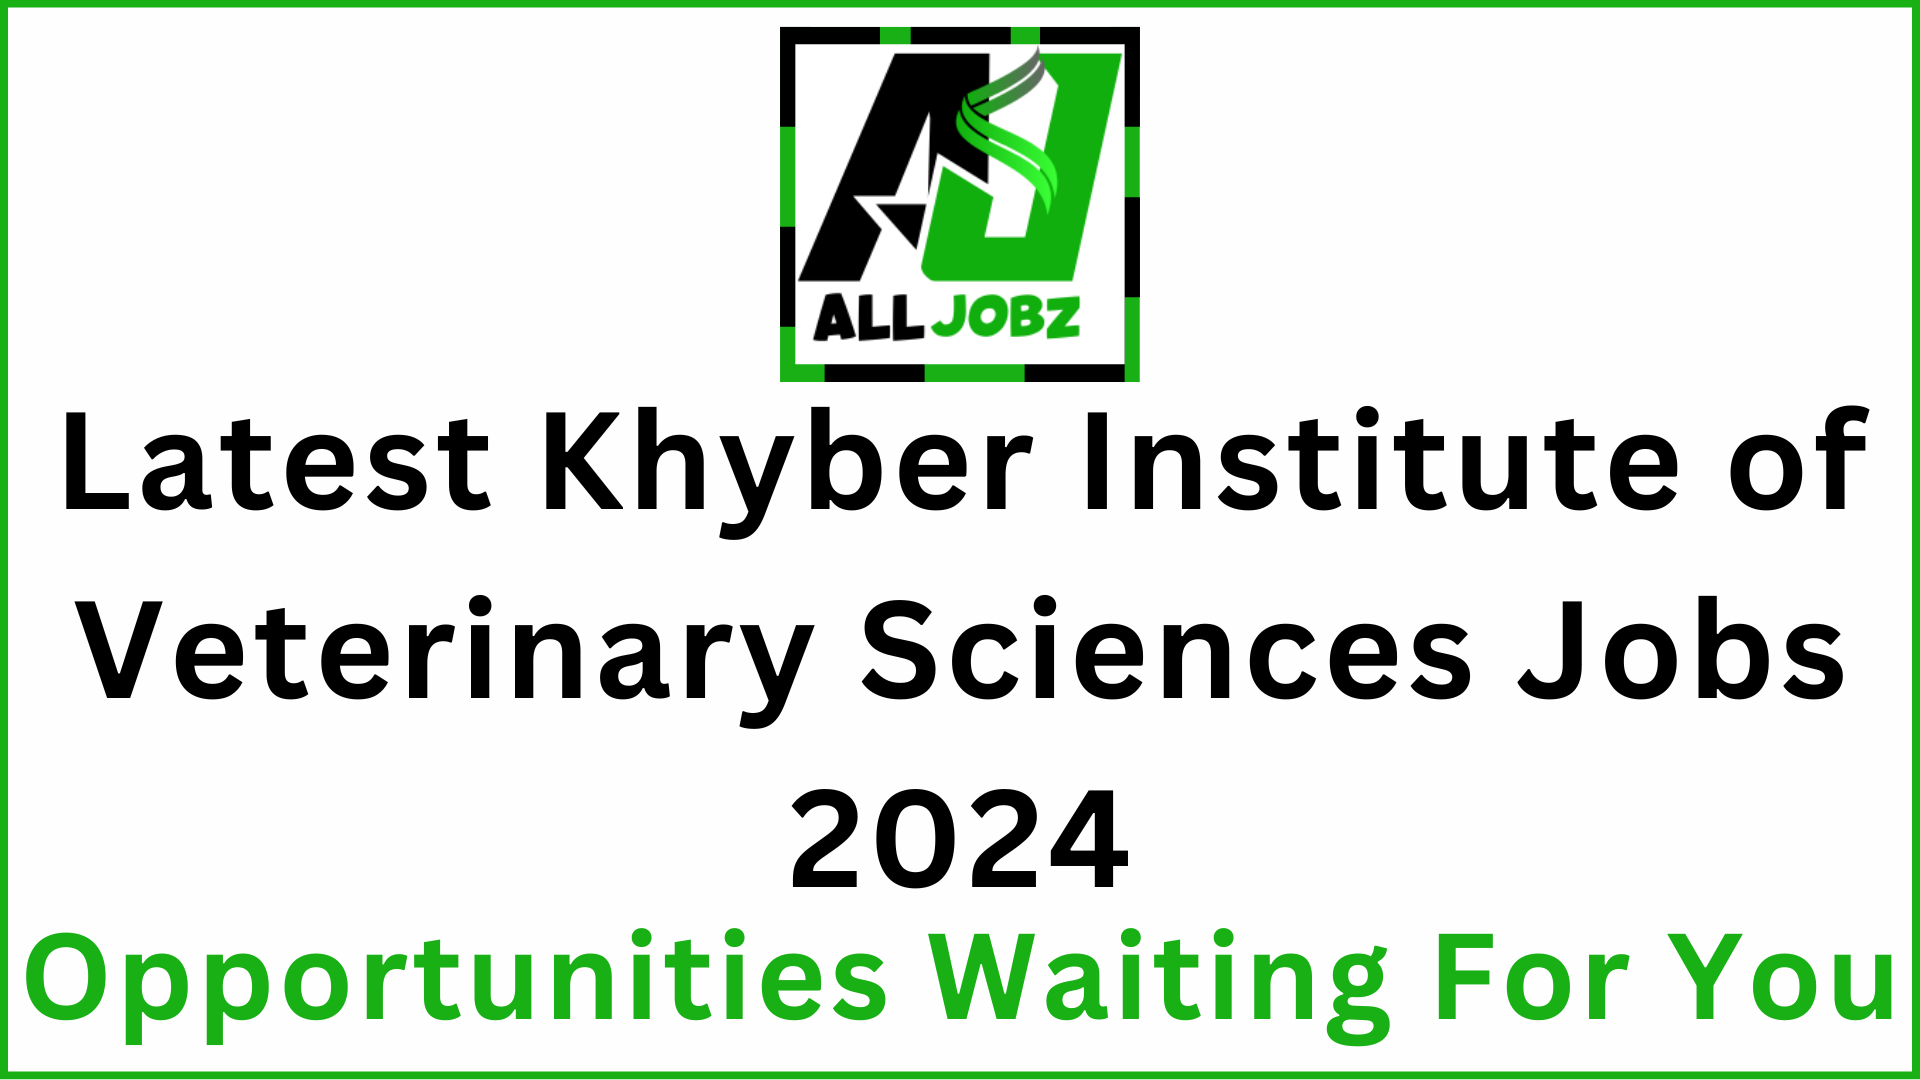 Khyber Institute Of Veterinary Sciences Peshawar Jobs, Khyber Institute Of Veterinary Sciences Peshawar Jobs 2024, Kivs Job Vacancies 2024, Peshawar Veterinary Institute Positions, Kivs Lecturer Jobs, Veterinary Assistant Positions Kivs, Khyber Veterinary Science Employment,